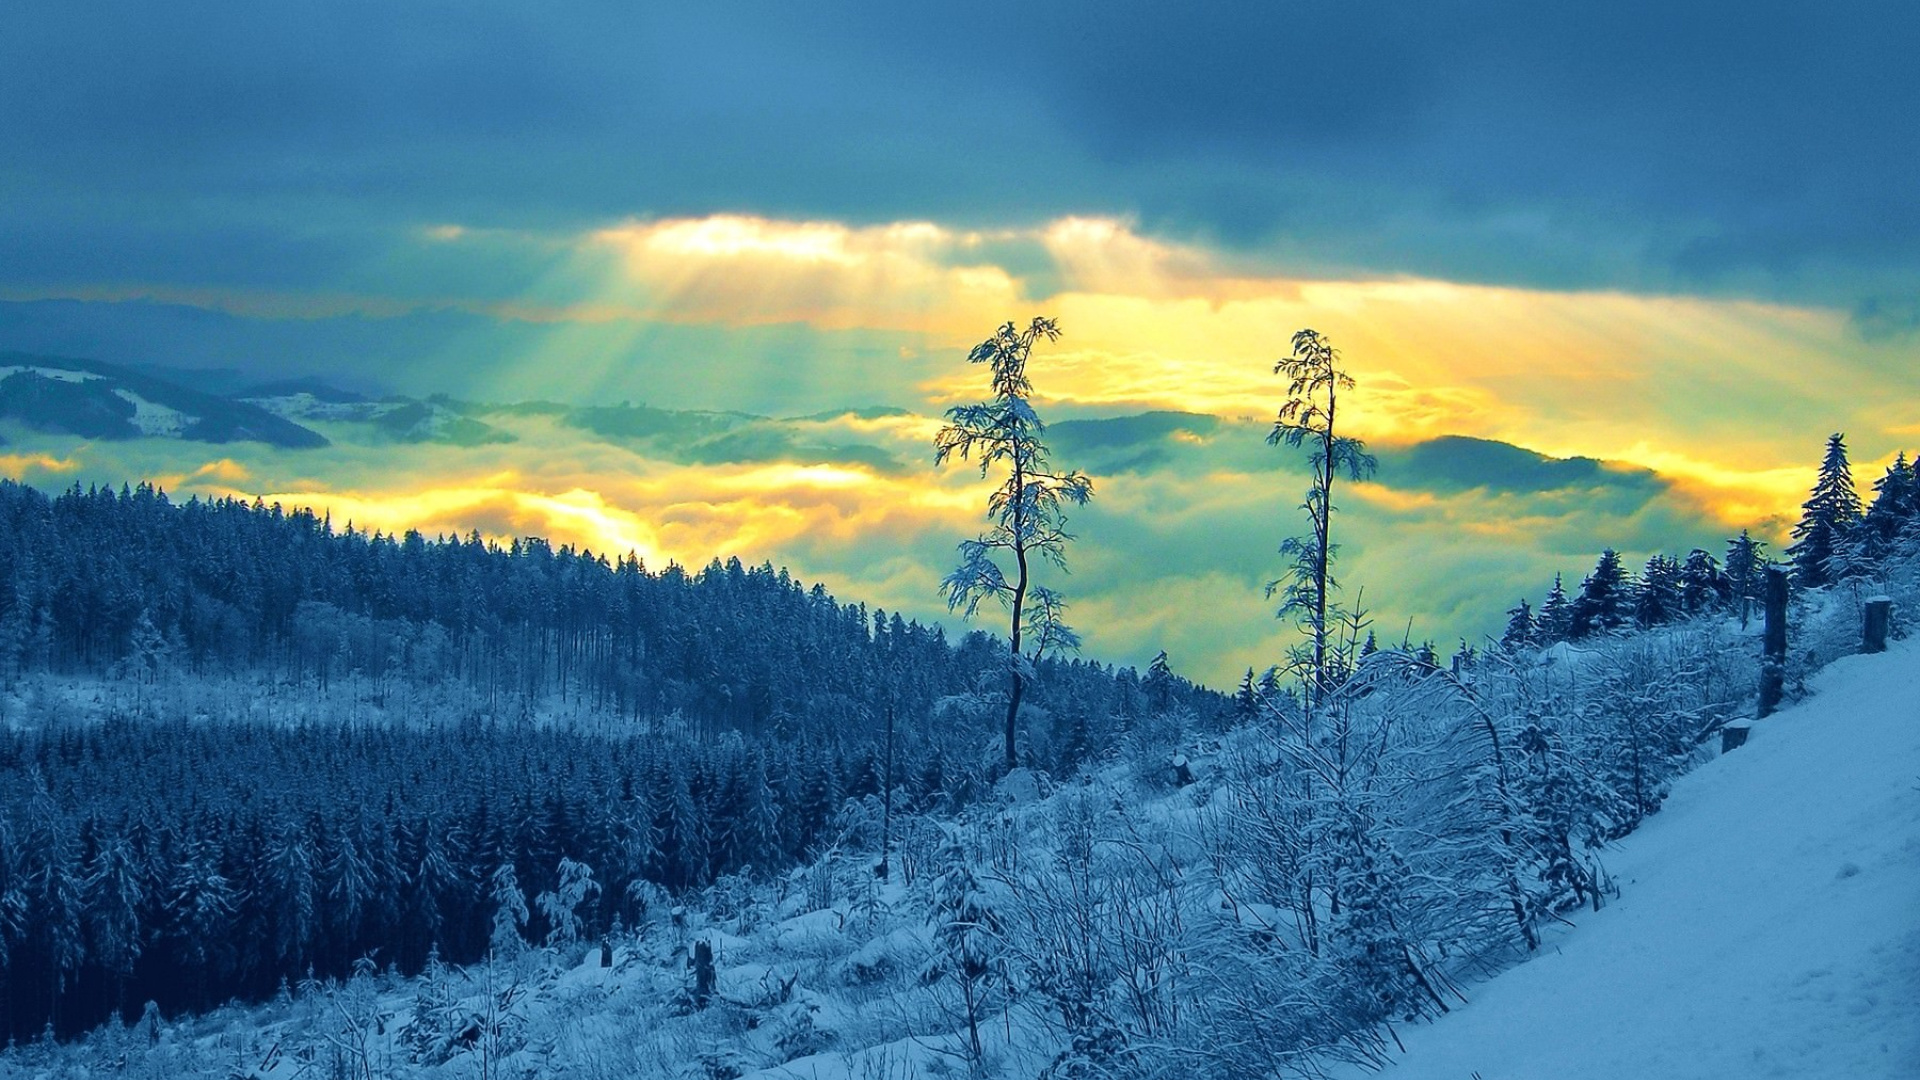 Snow Covered Trees Under Cloudy Sky During Daytime. Wallpaper in 1920x1080 Resolution